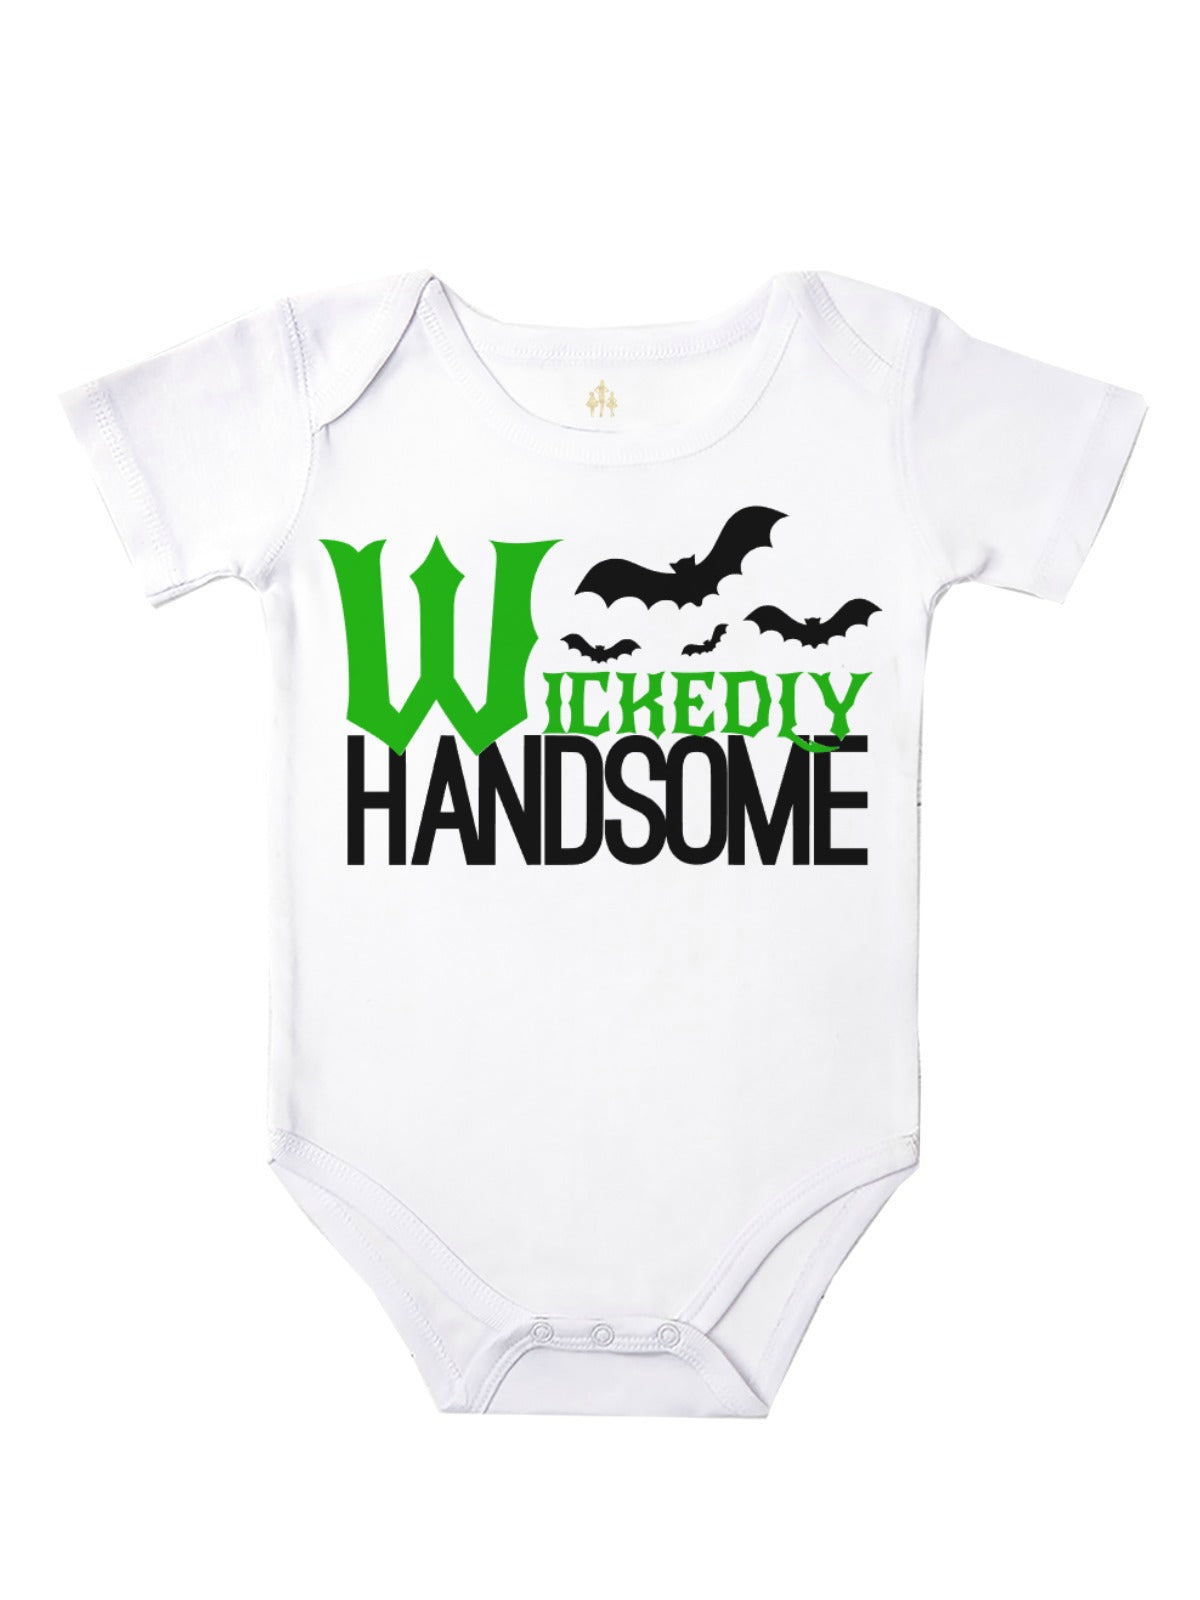 wickedly handsome baby bodysuit for Halloween